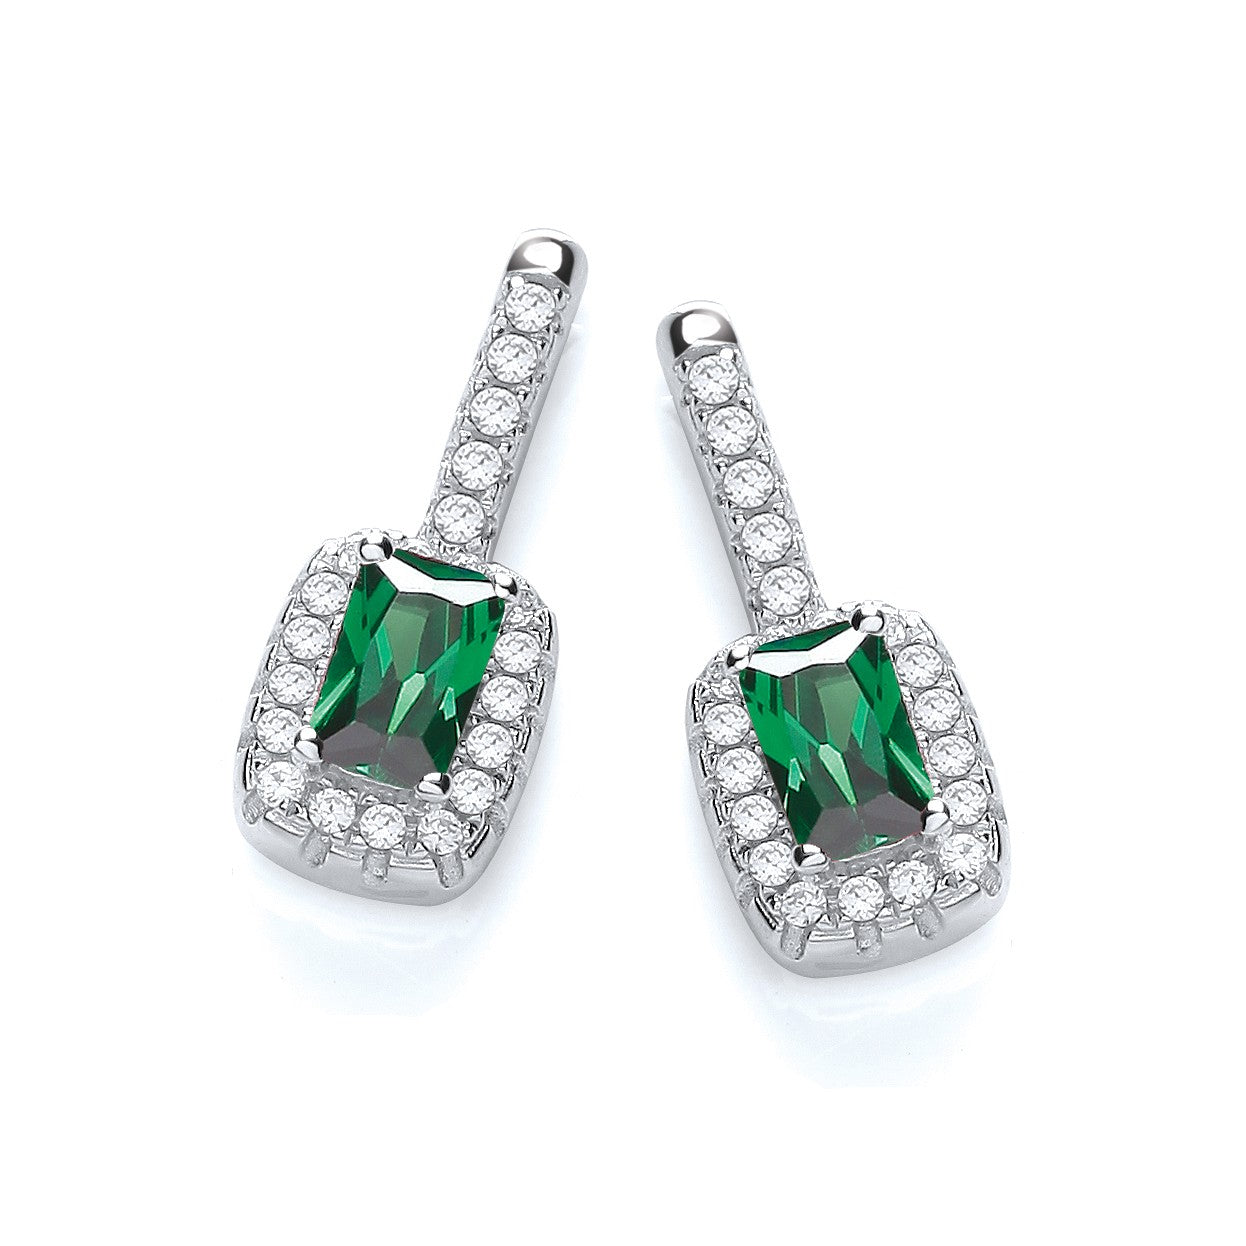 Micro Pave' Fancy Drop Earring with Small Green Cz